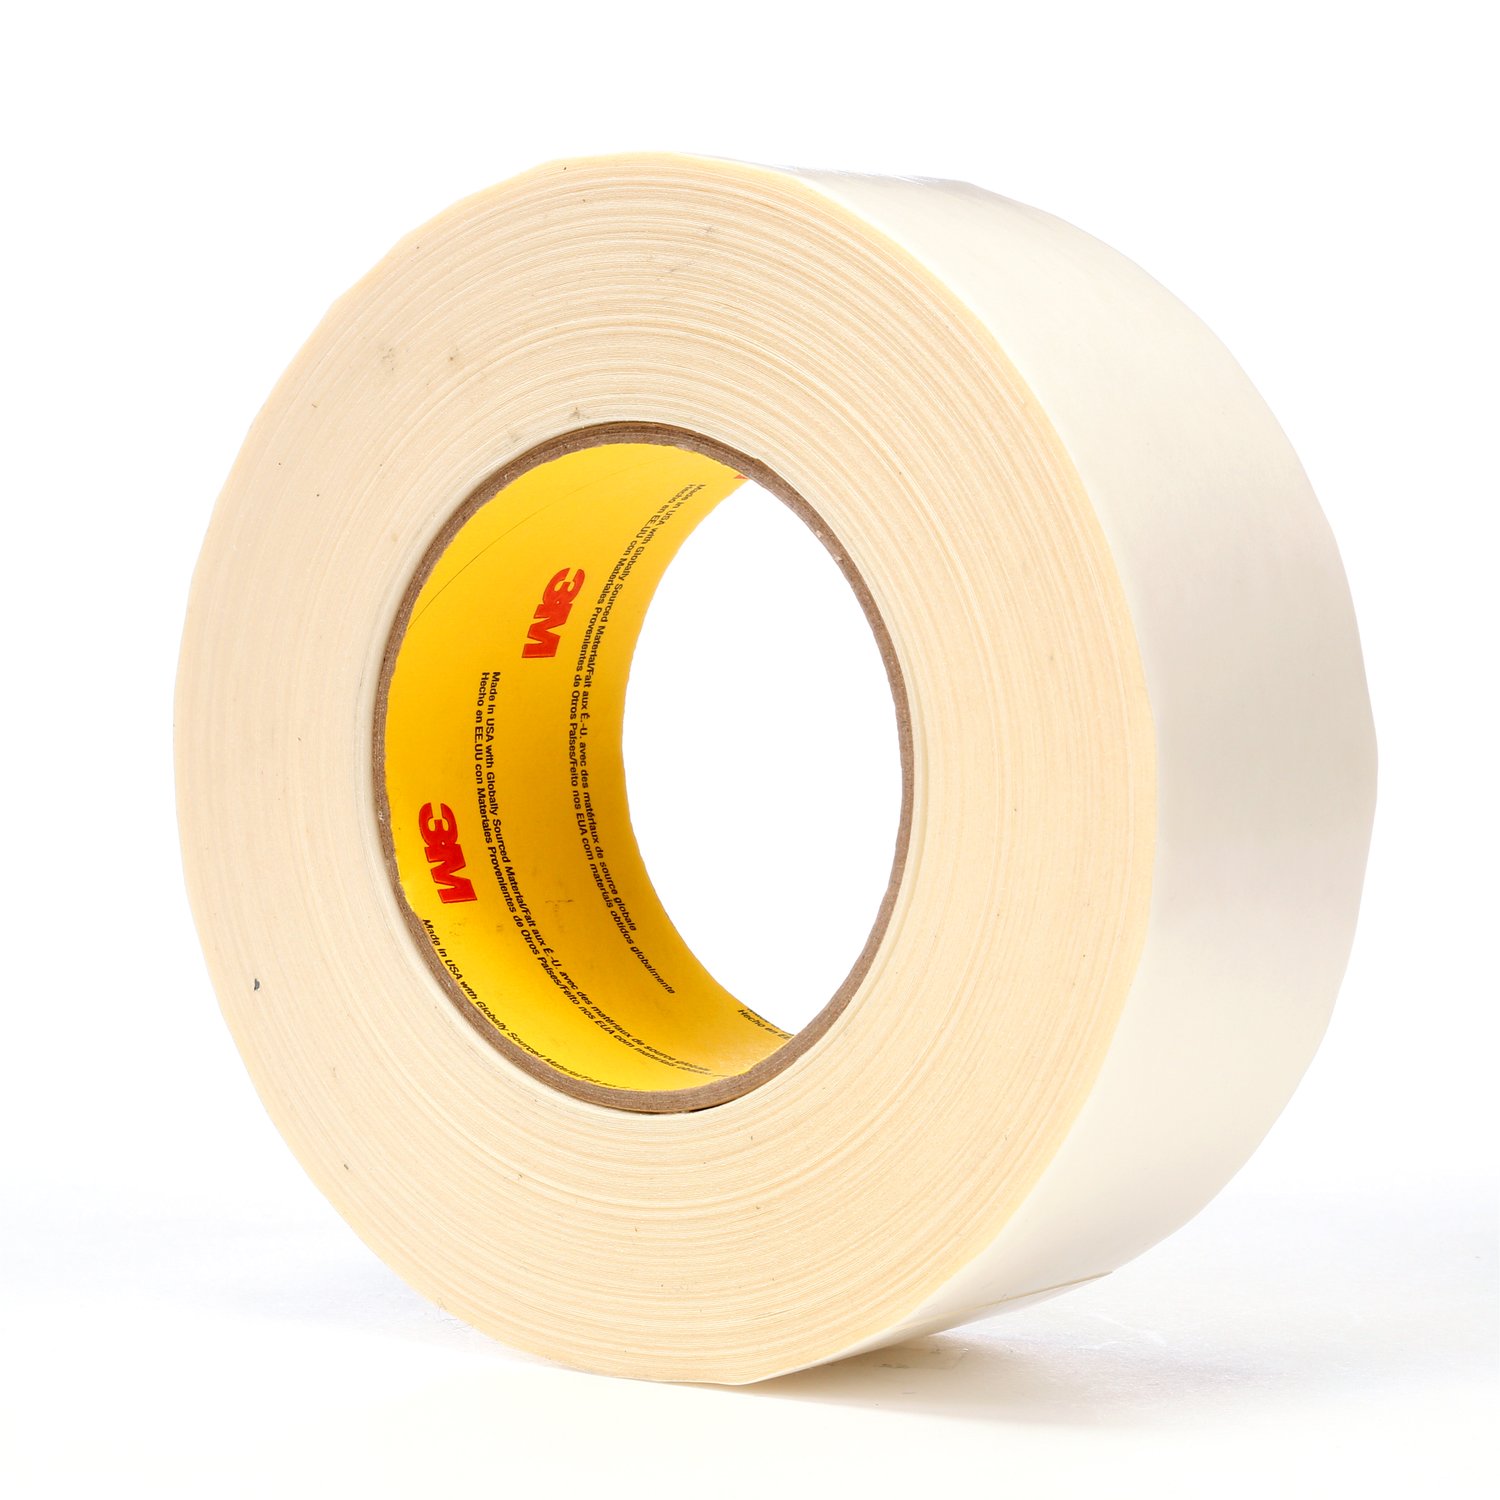 7000029051 - 3M Double Coated Tape 9740, Clear, 48 mm x 55 m, 3.5 mil, 24 rolls per
case